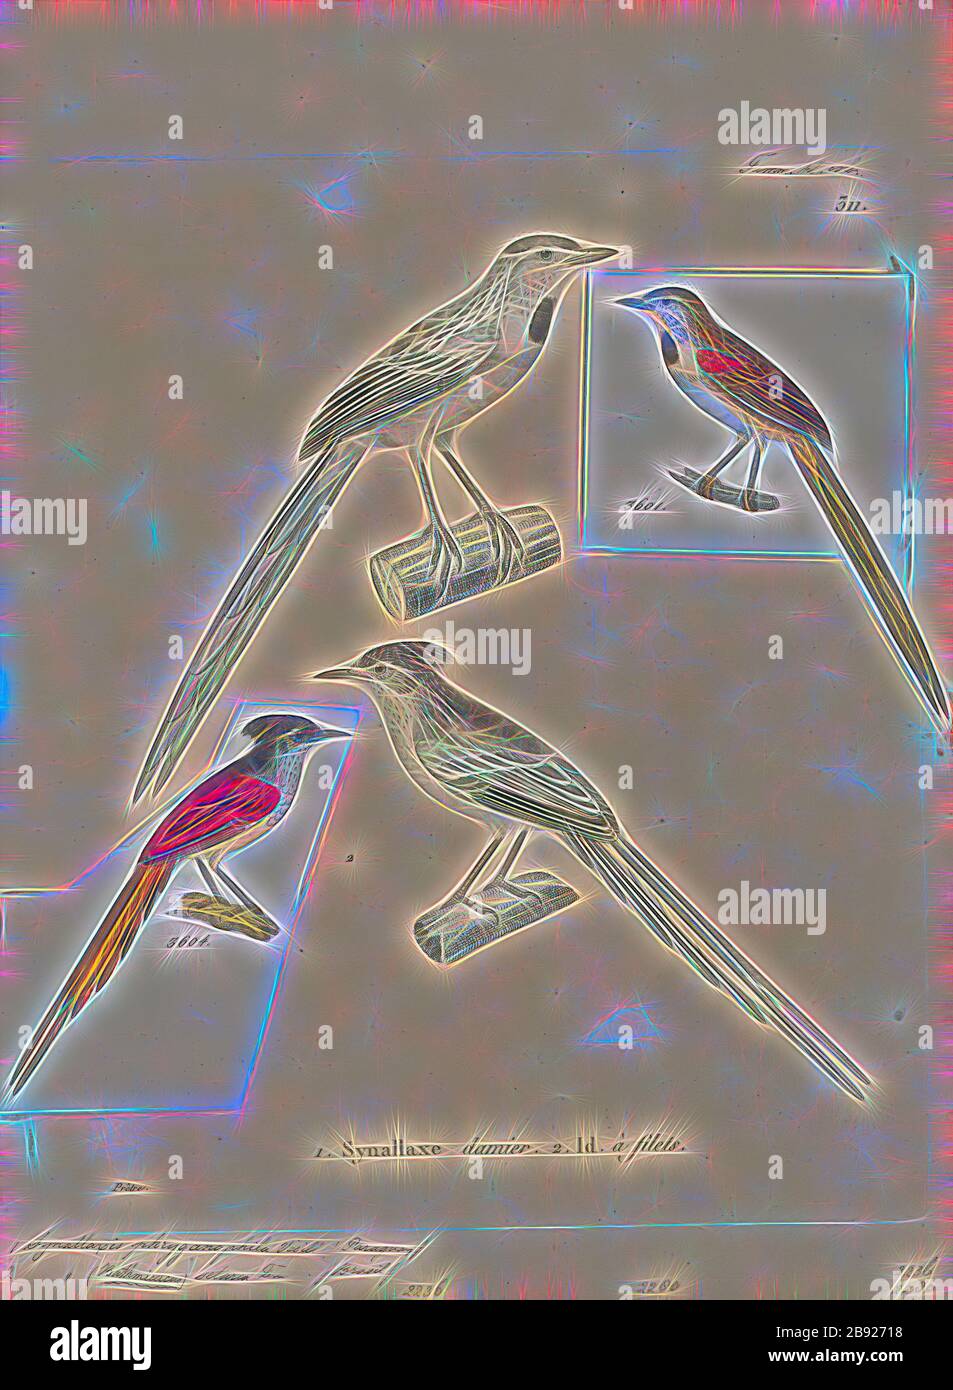 Synallaxis phryganophila, Print, Synallaxis is a genus of birds in the ovenbird family, Furnariidae., 1700-1880, Reimagined by Gibon, design of warm cheerful glowing of brightness and light rays radiance. Classic art reinvented with a modern twist. Photography inspired by futurism, embracing dynamic energy of modern technology, movement, speed and revolutionize culture. Stock Photo